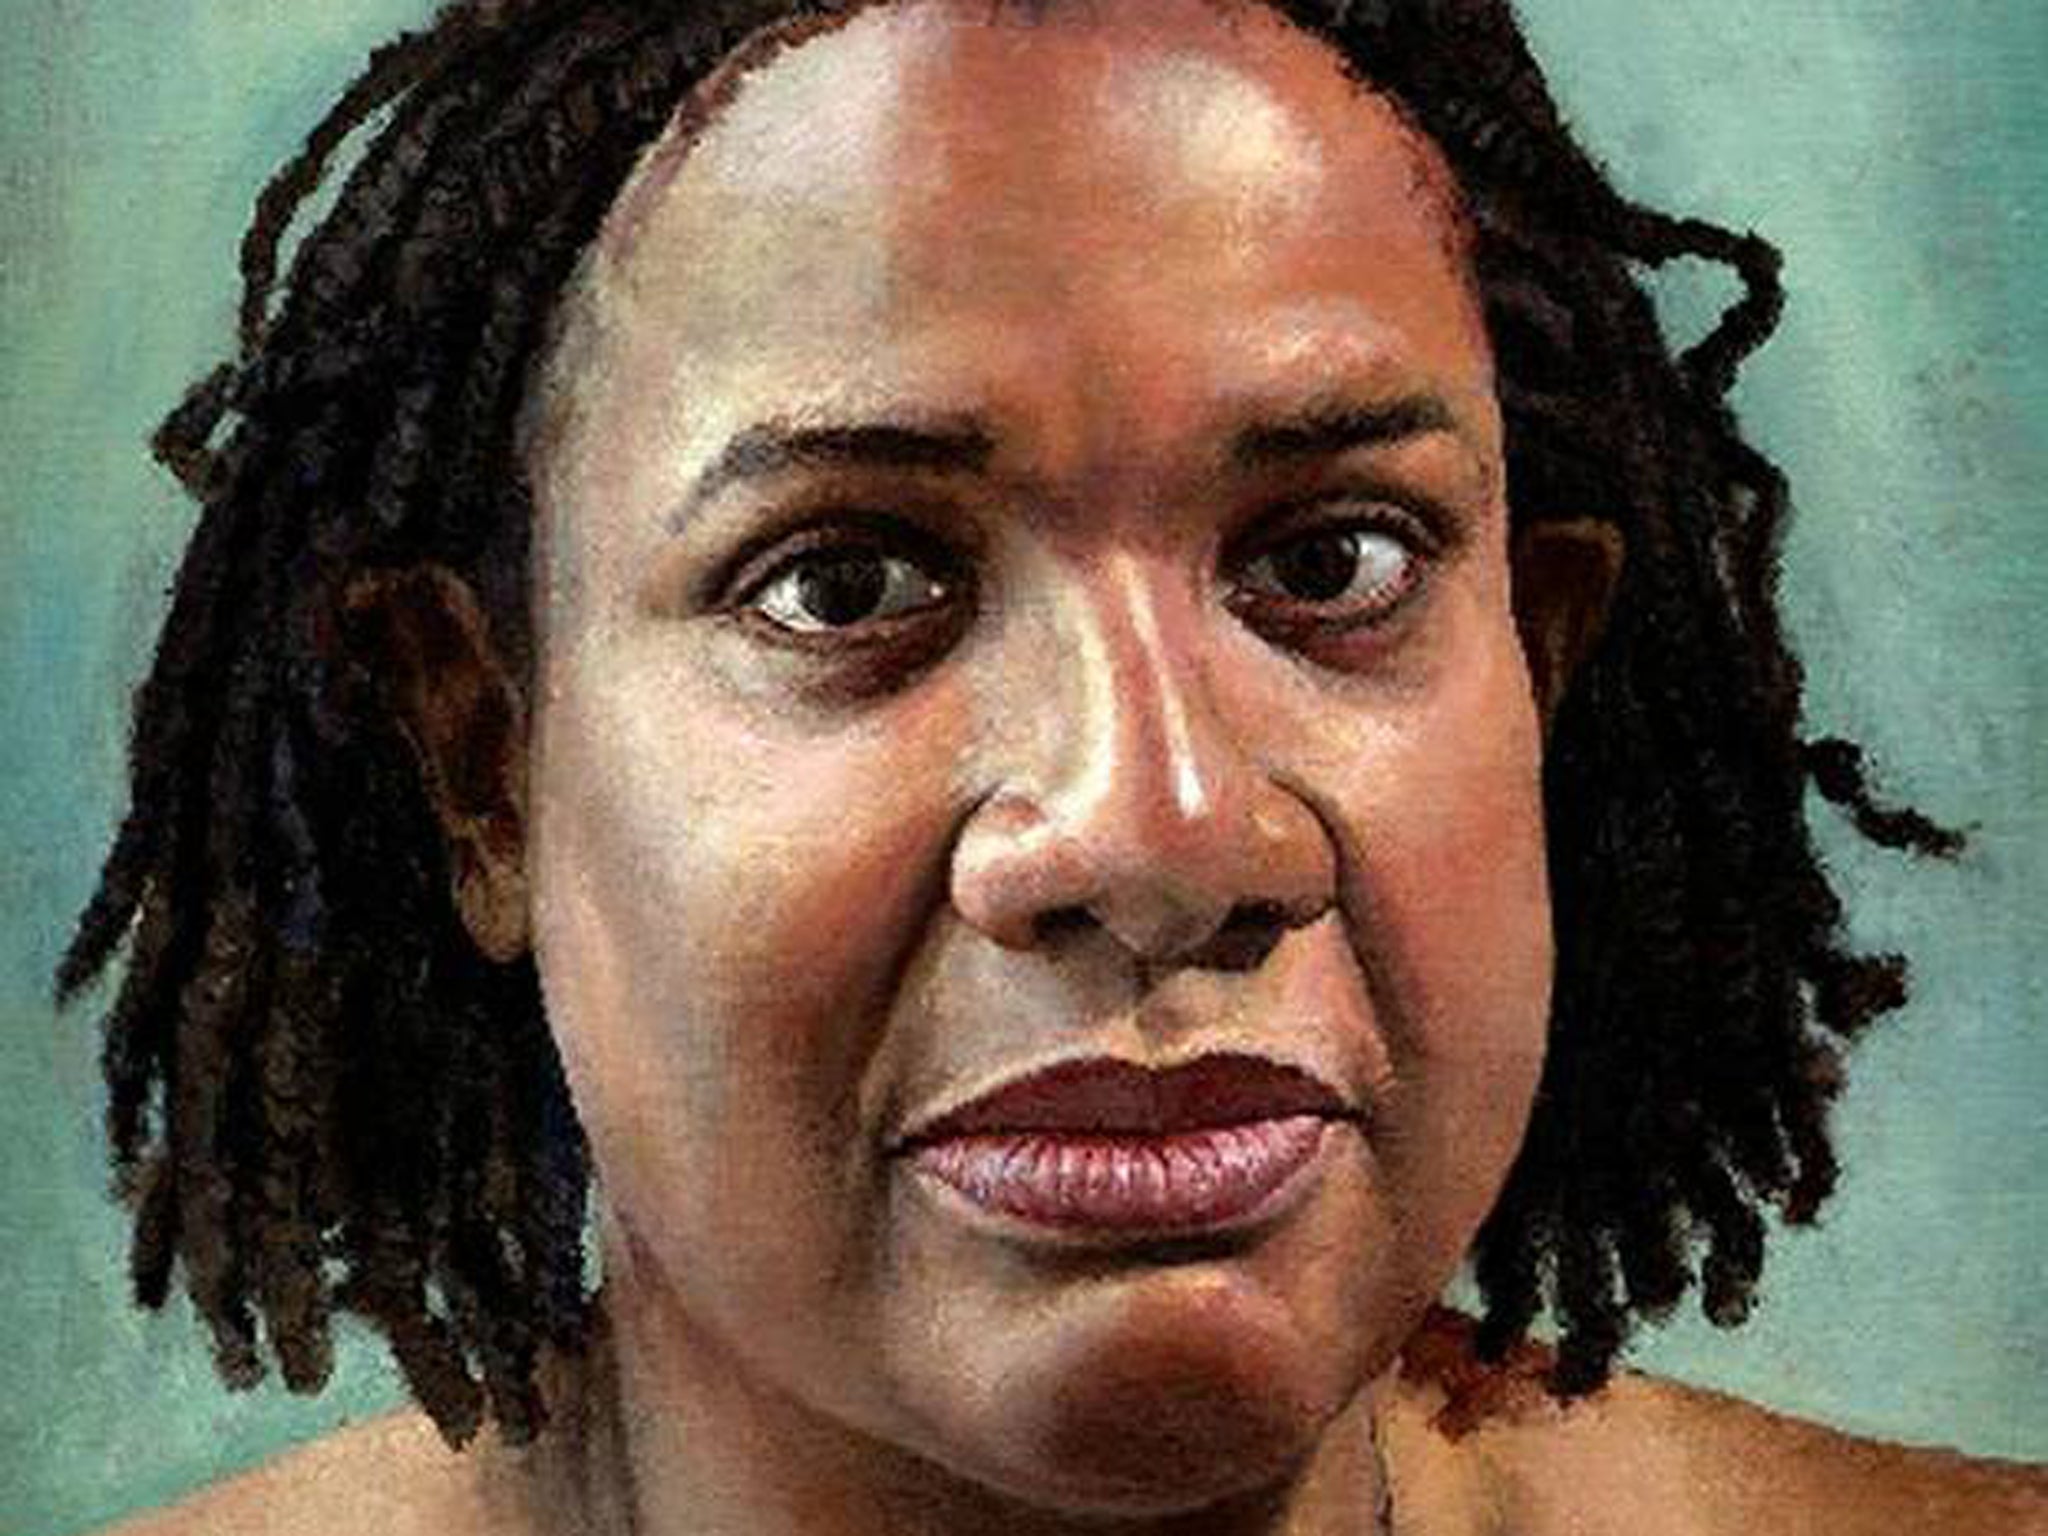 A 2004 painting of MP Diane Abbott which cost £11,750, by Stuart Pearson Wright